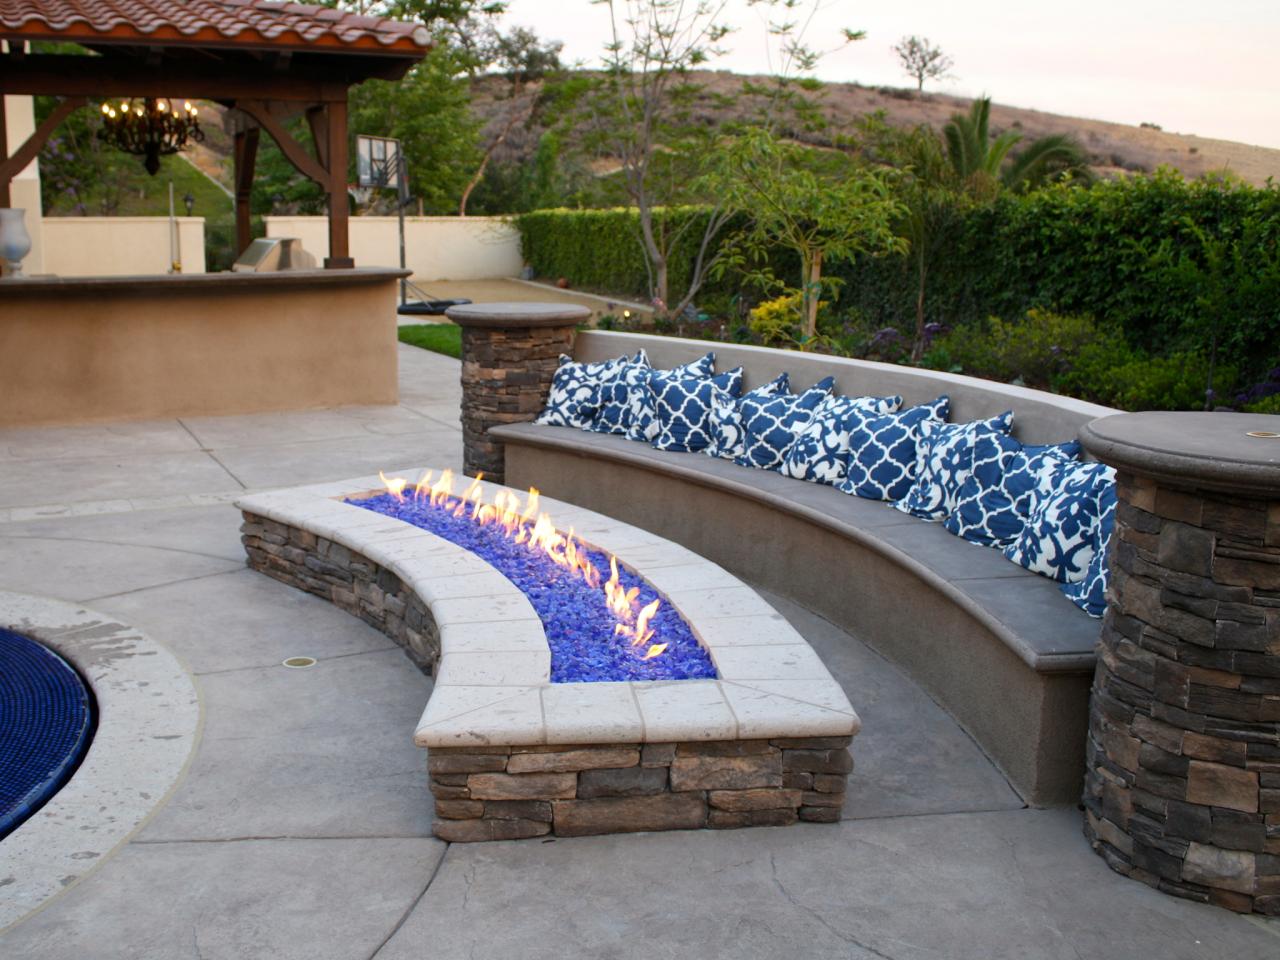 Designing A Patio Around Fire Pit Diy, In Ground Gas Fire Pit Kit